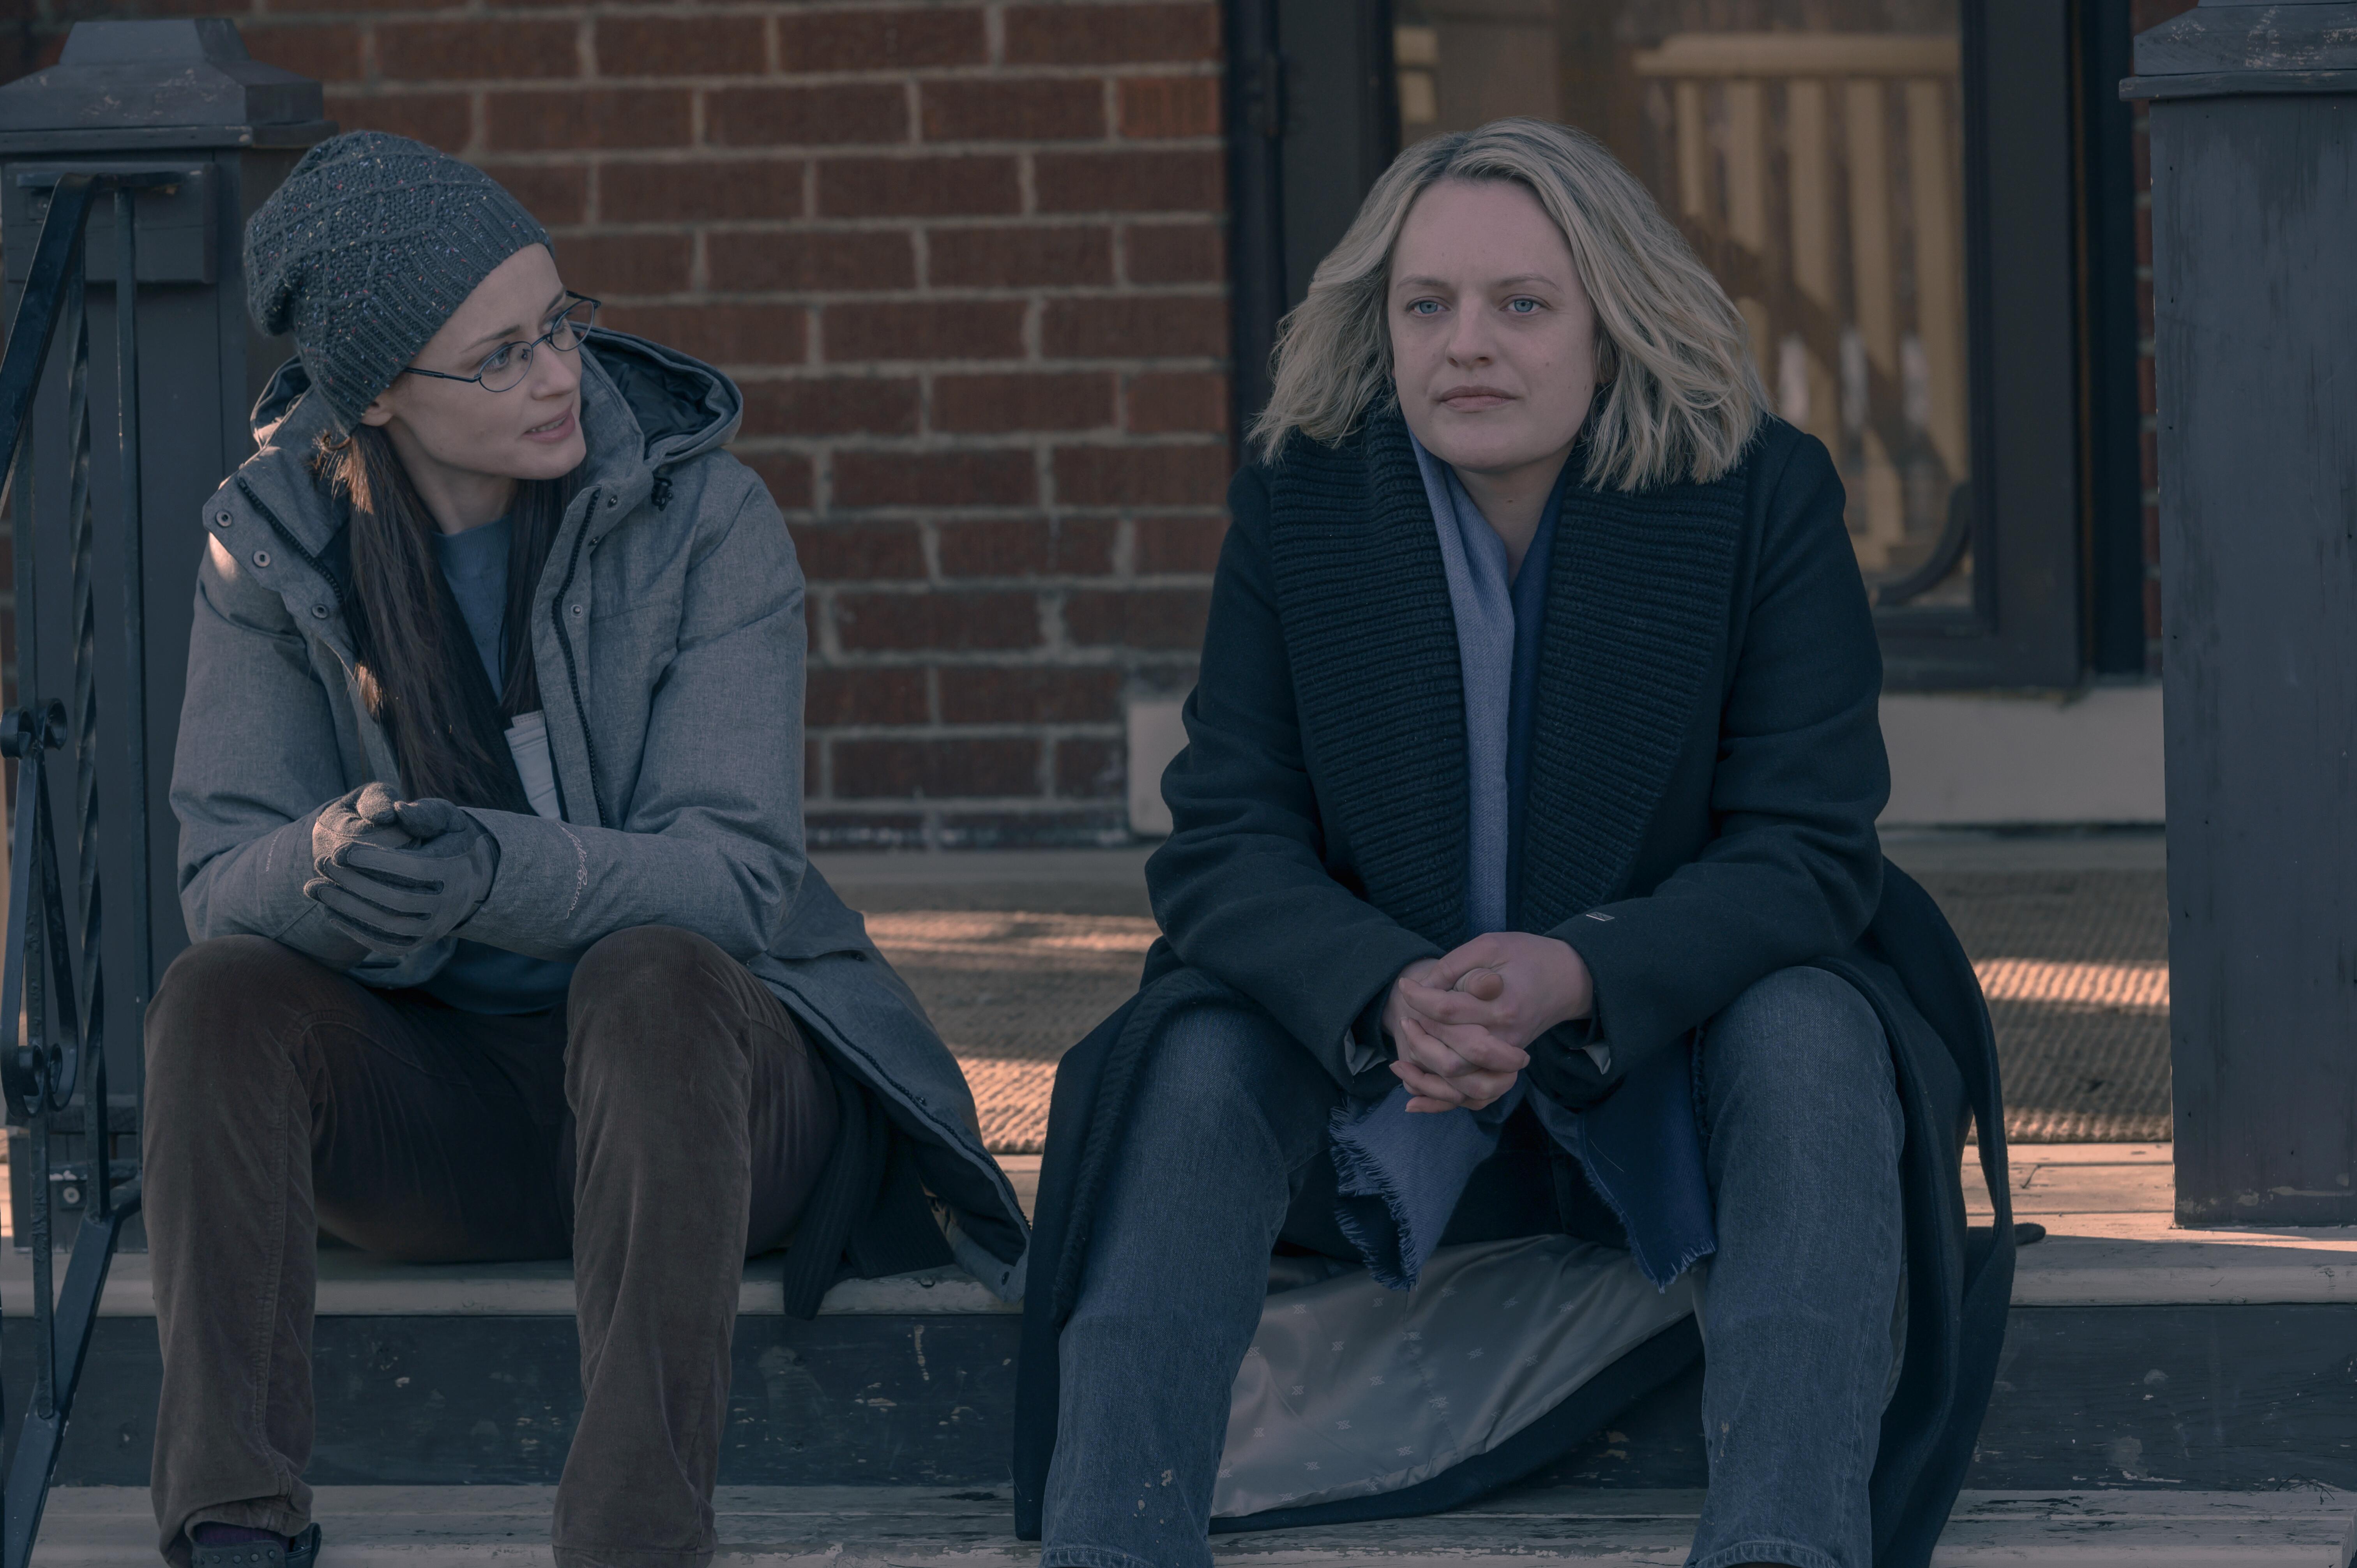 Emily and June sit on porch steps in season 4 of 'The Handmaid's Tale'